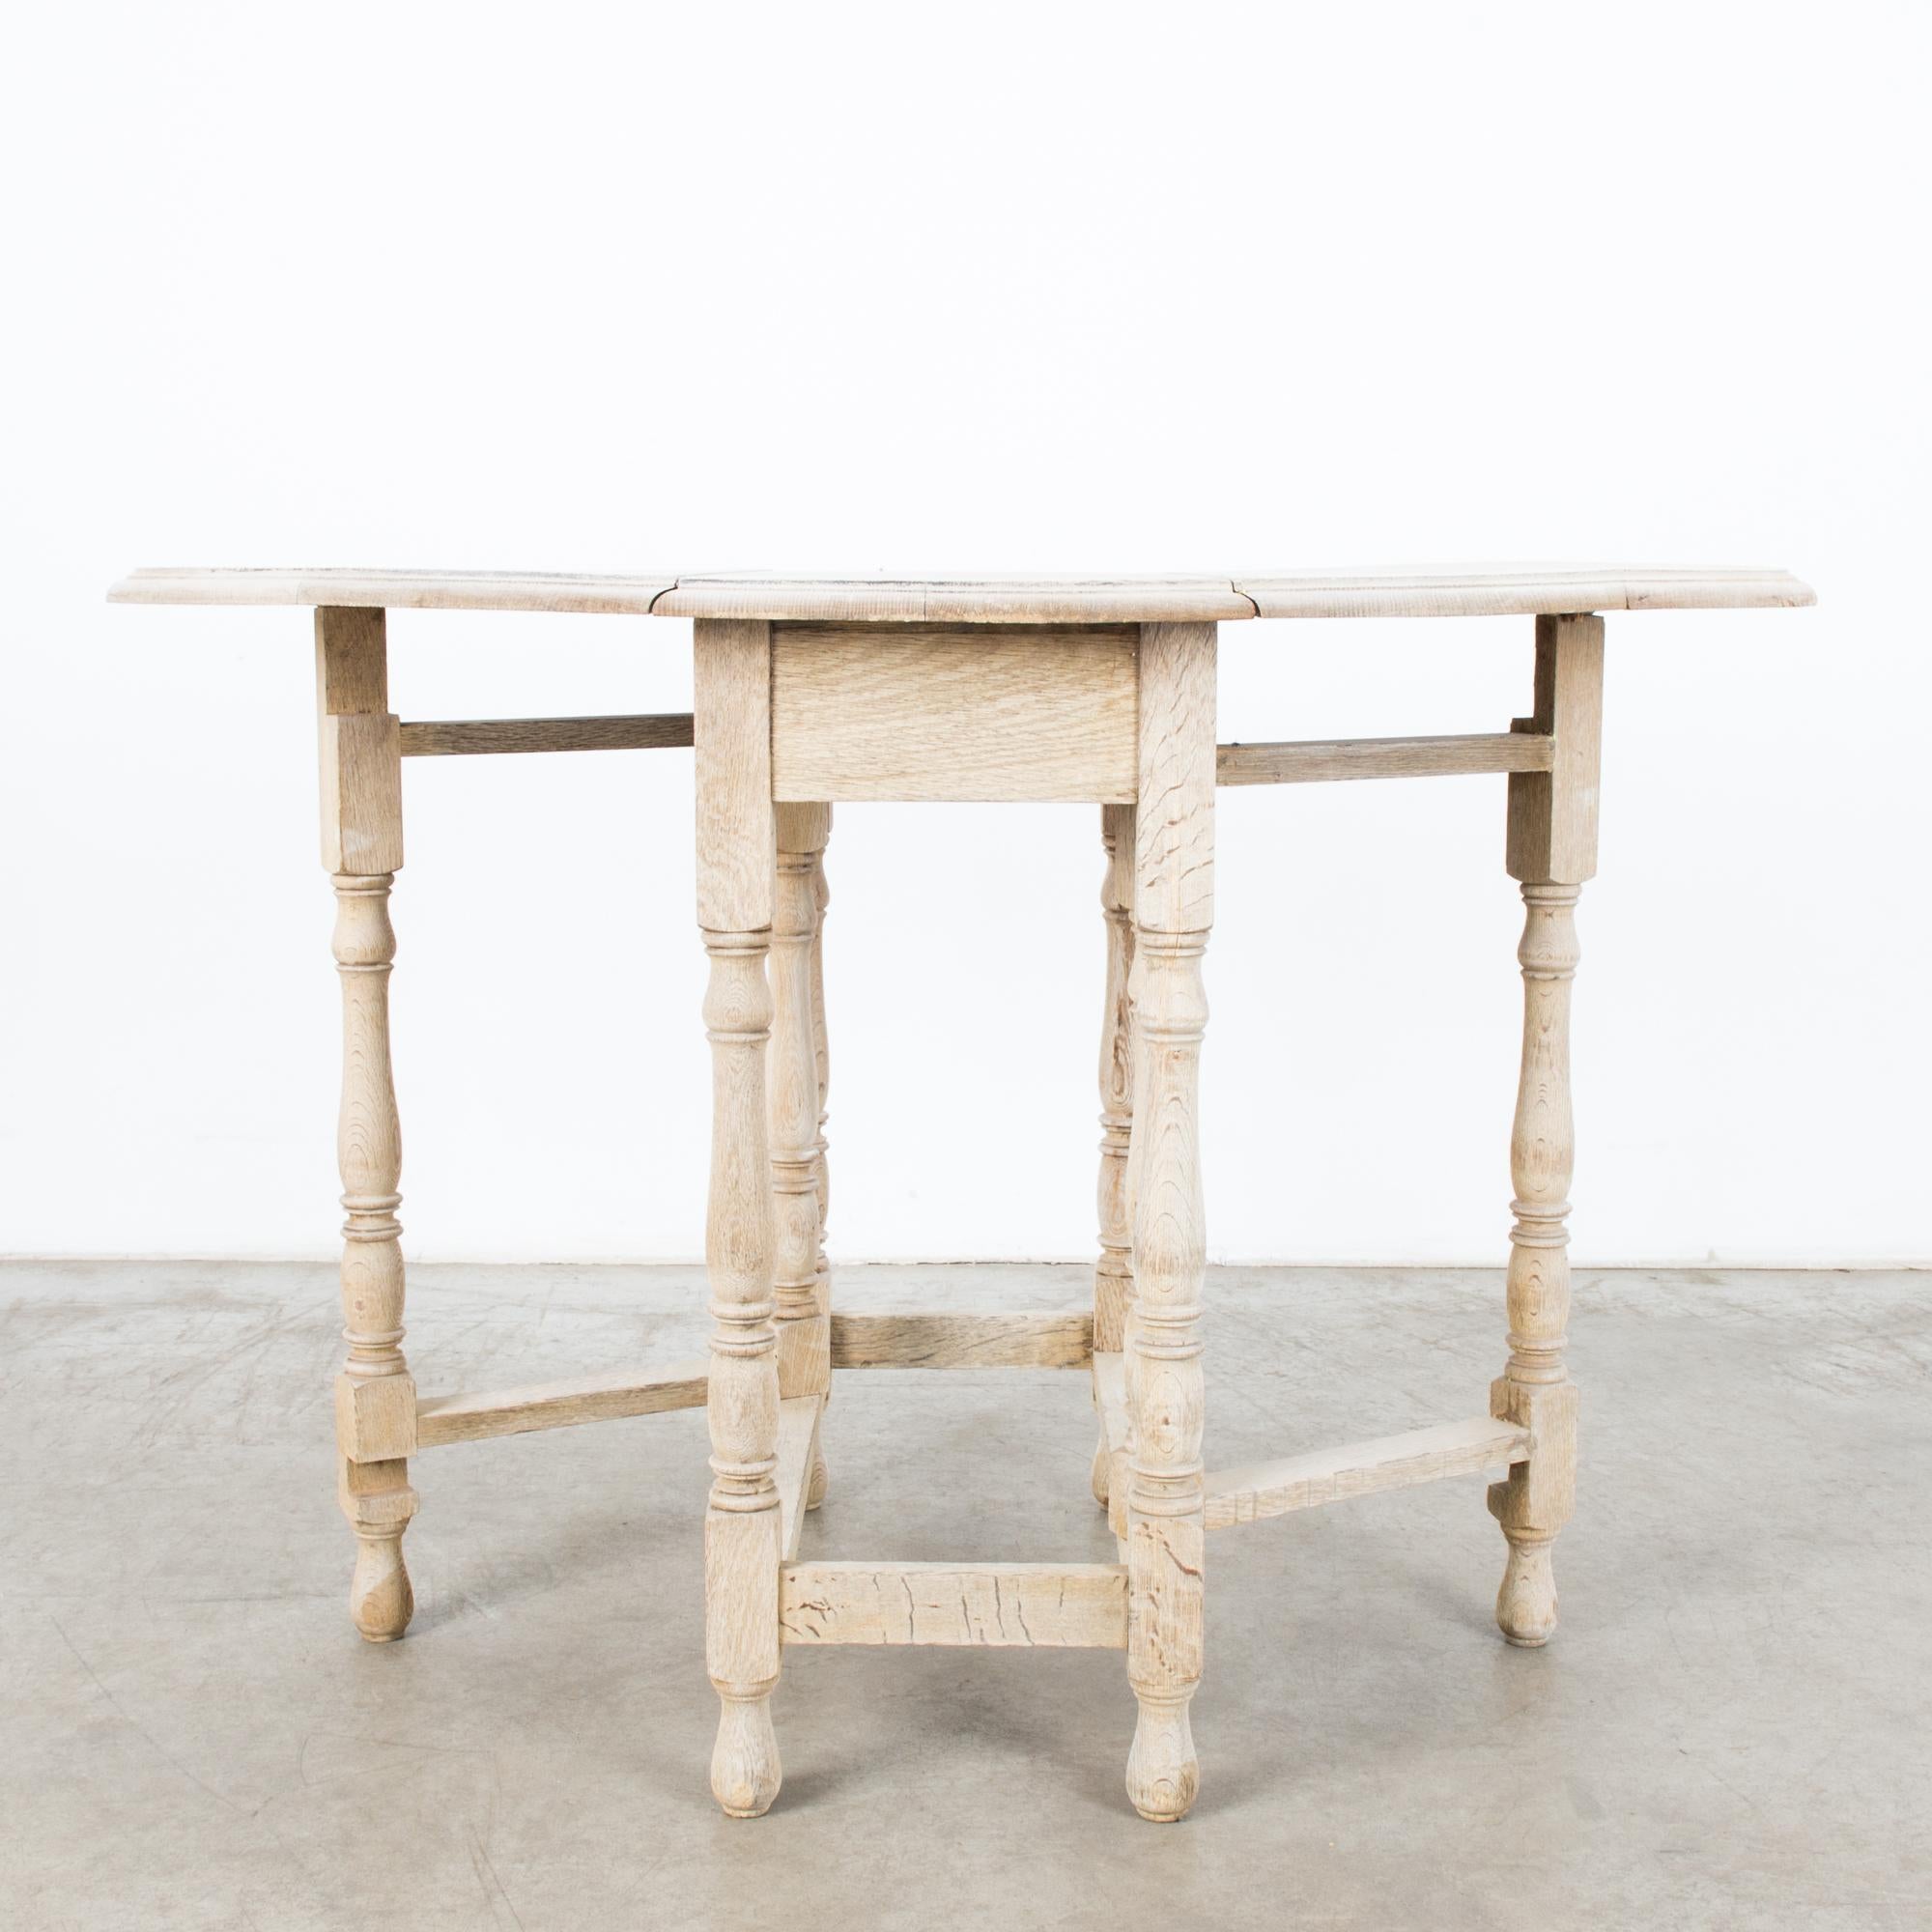 A bleached oak gate leg table from the United Kingdom, circa 1900. Developed in England in the sixteenth century, the gate leg table was an early marvel of space saving innovation. This piece in beautifully grained oak shows how the style was